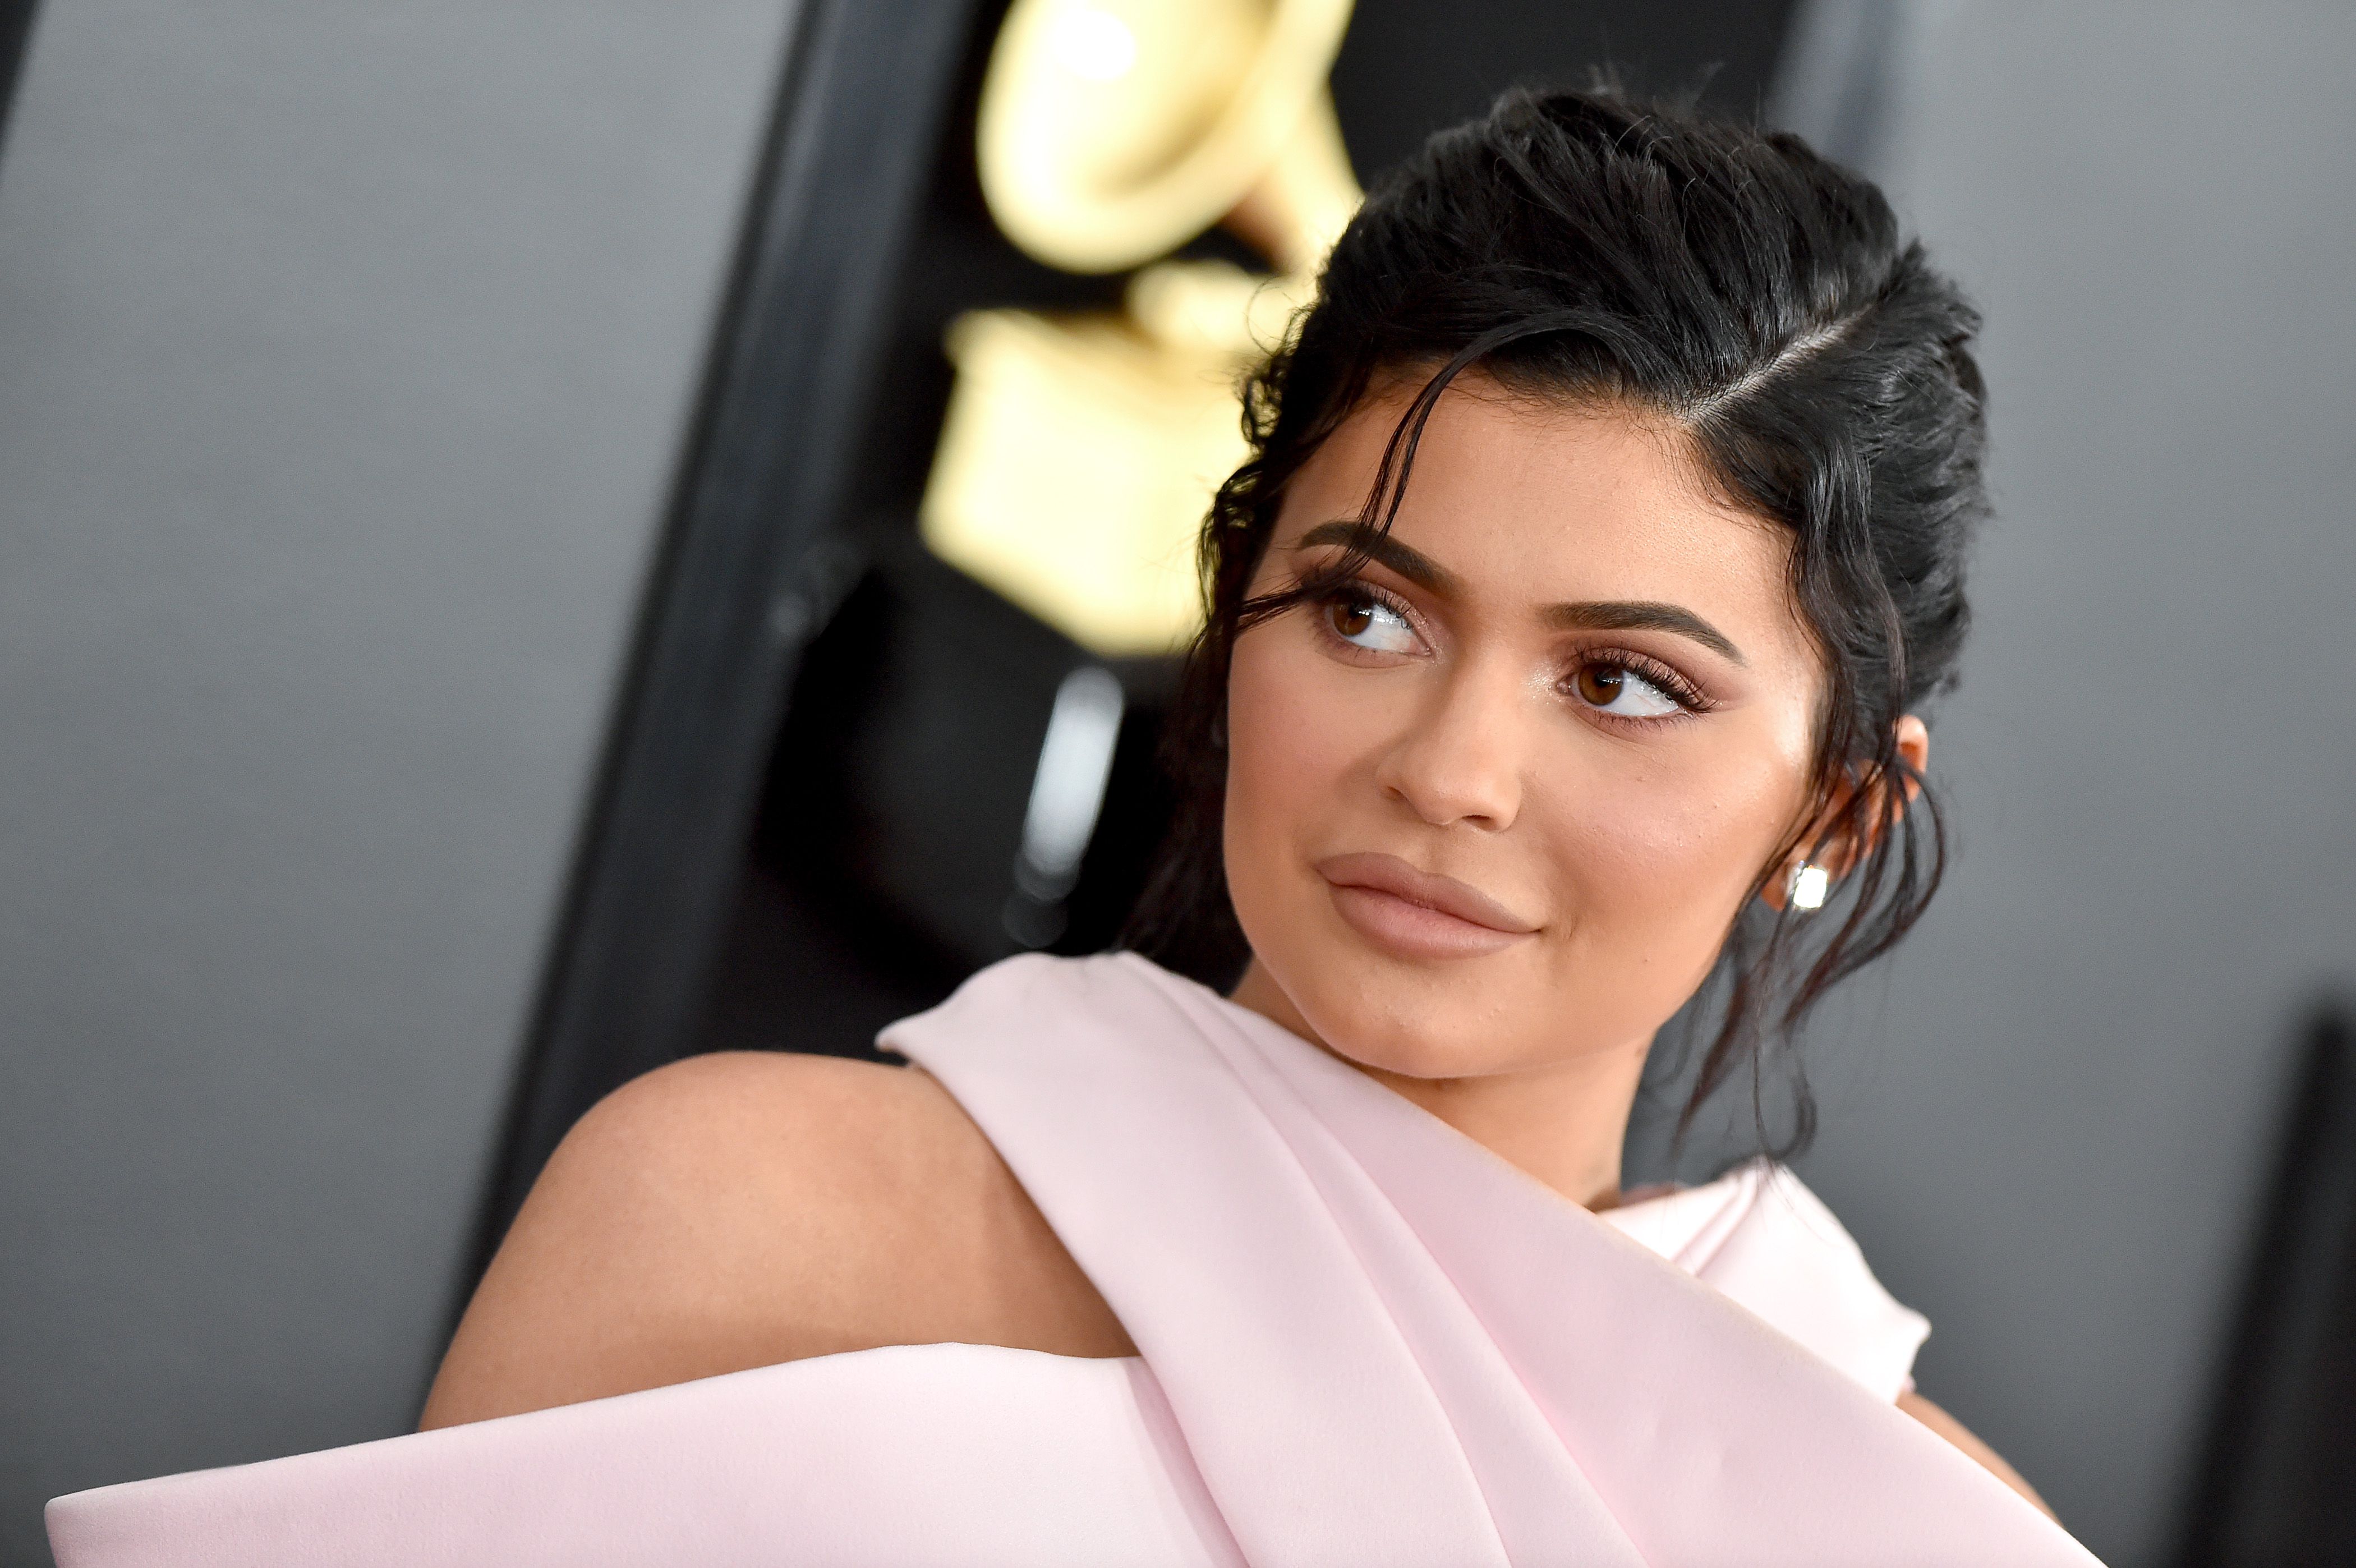 kylie-jenner-attends-the-61st-annual-grammy-awards-at-news-photo-1128898114-1552834198